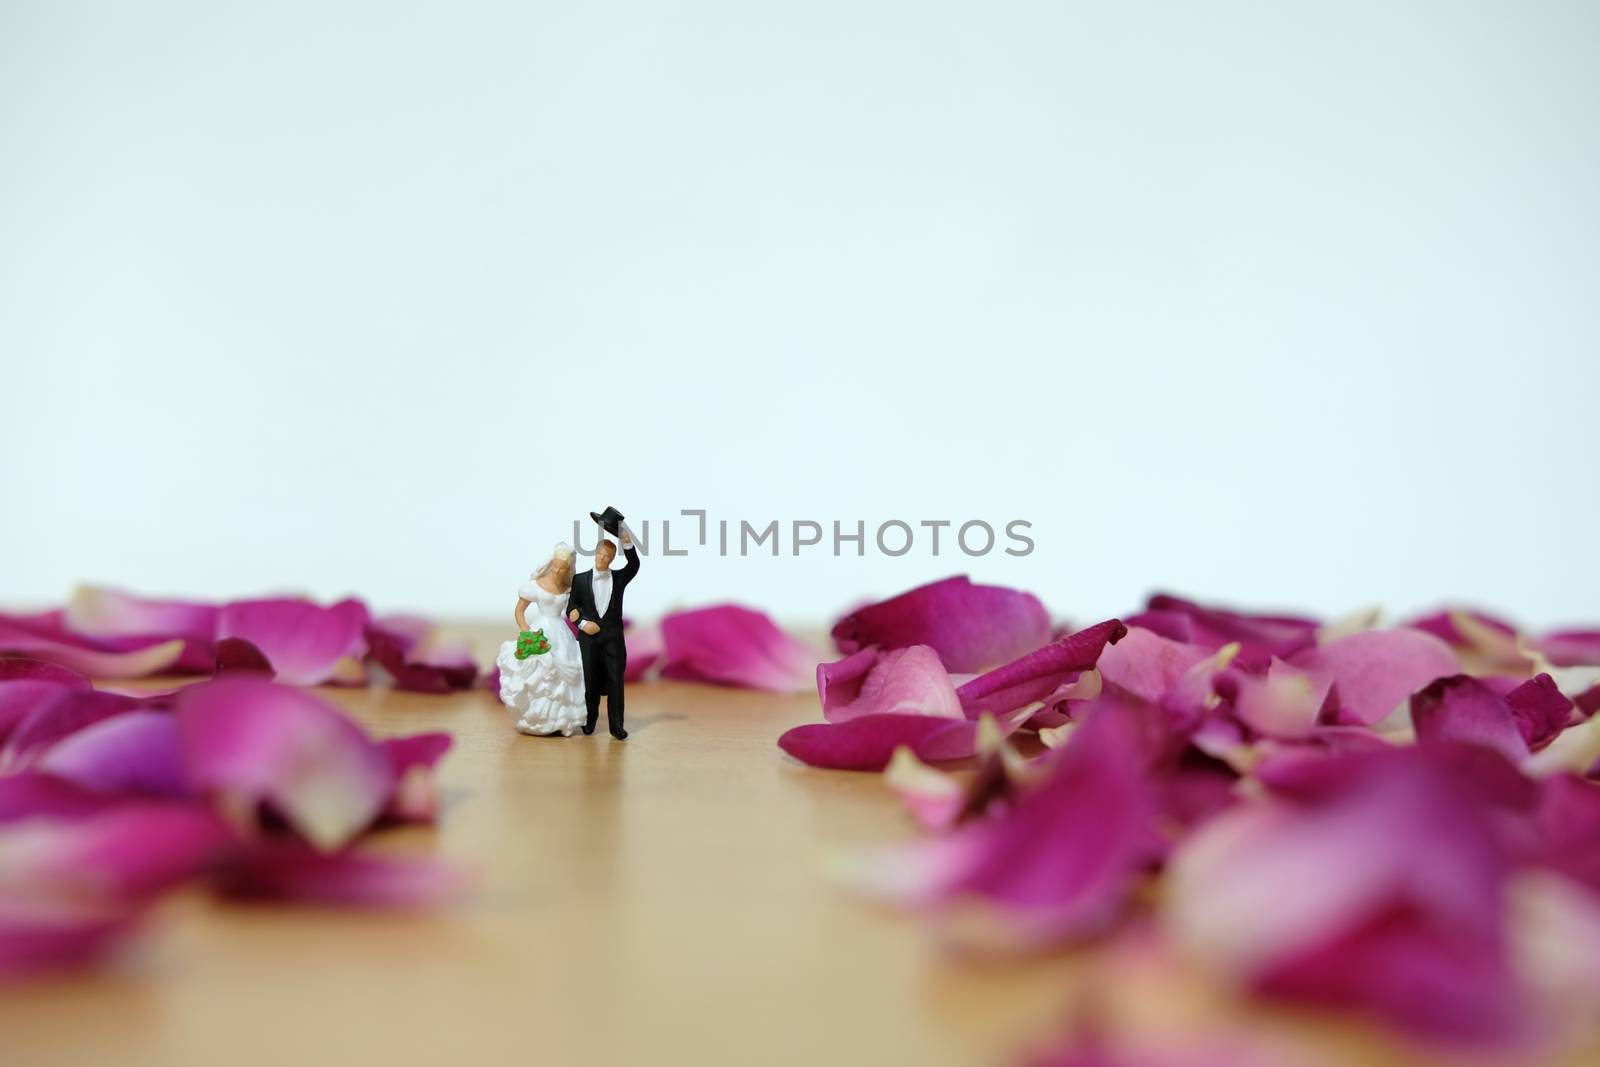 Miniature photography - outdoor garden wedding ceremony concept, bride and groom walking on red rose flower pile by Macrostud